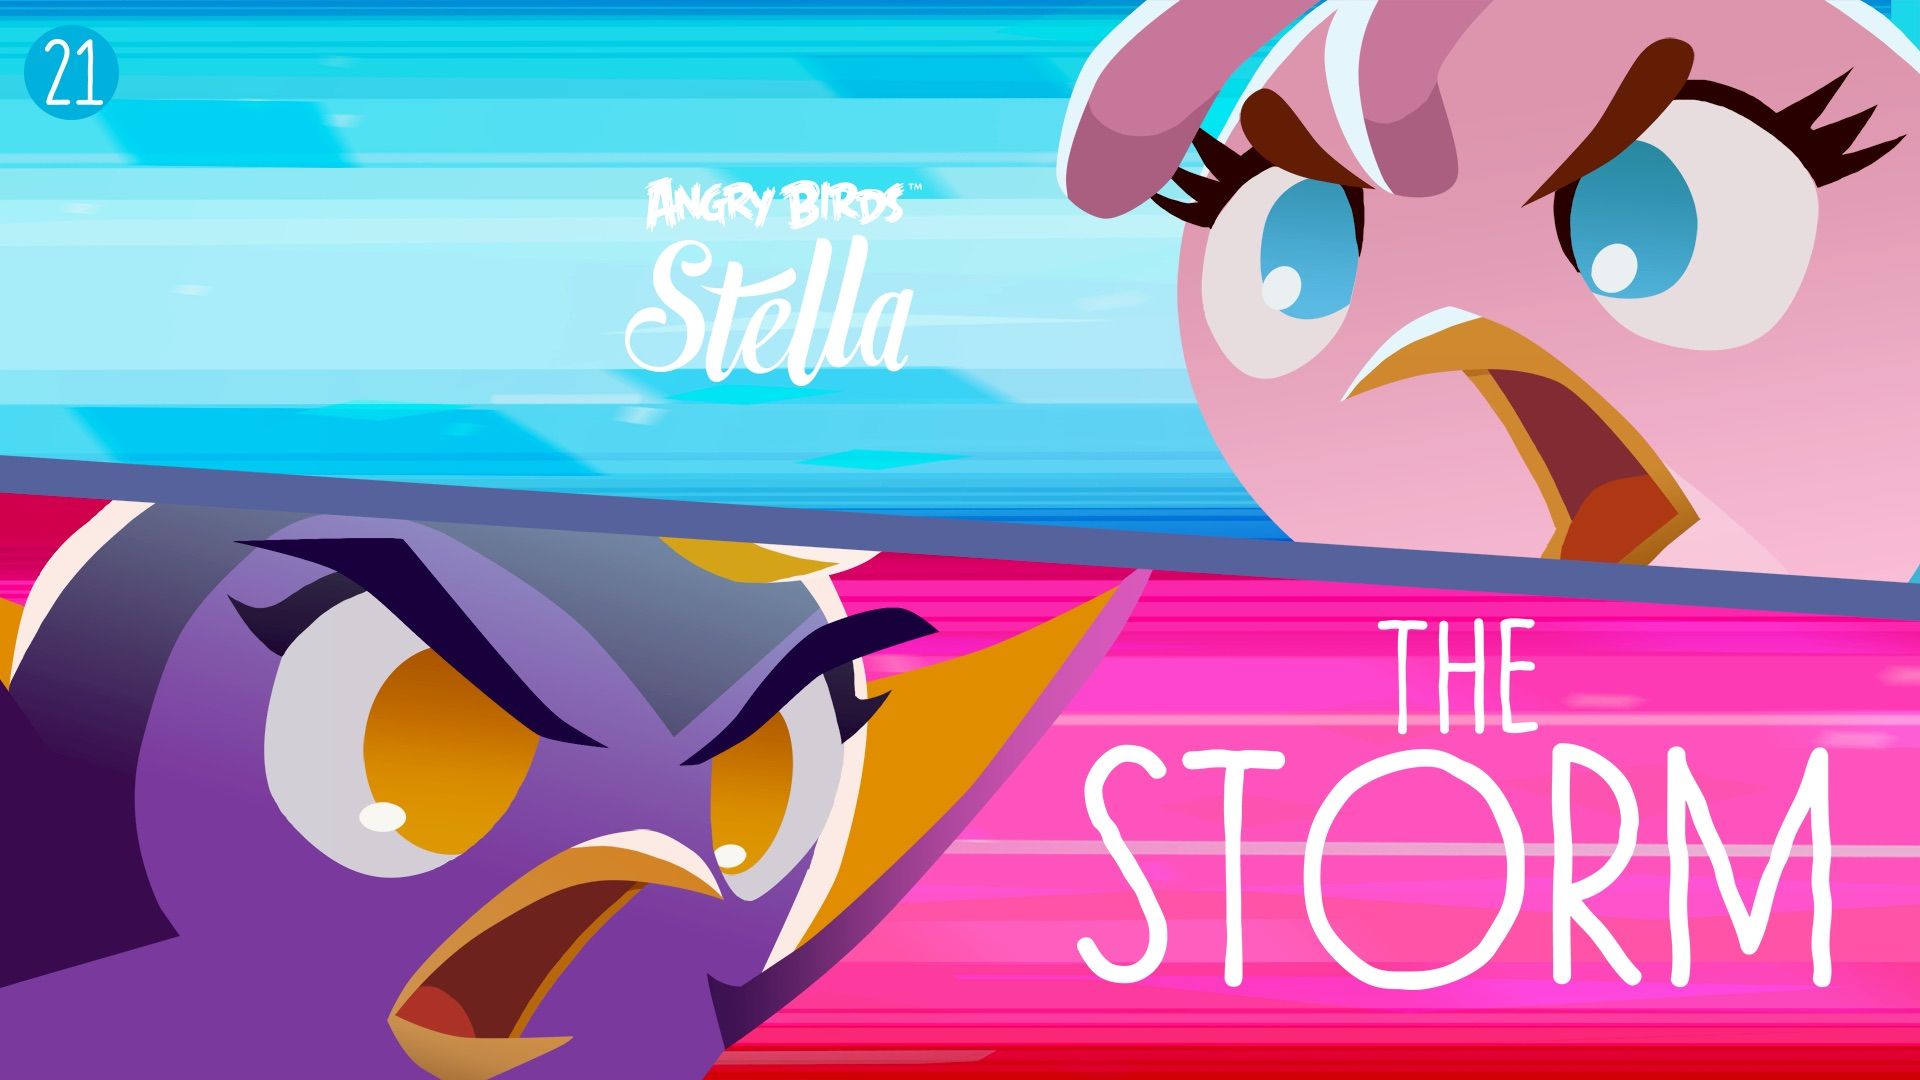 Angry Birds Stella The Storm (TV Episode 2016)